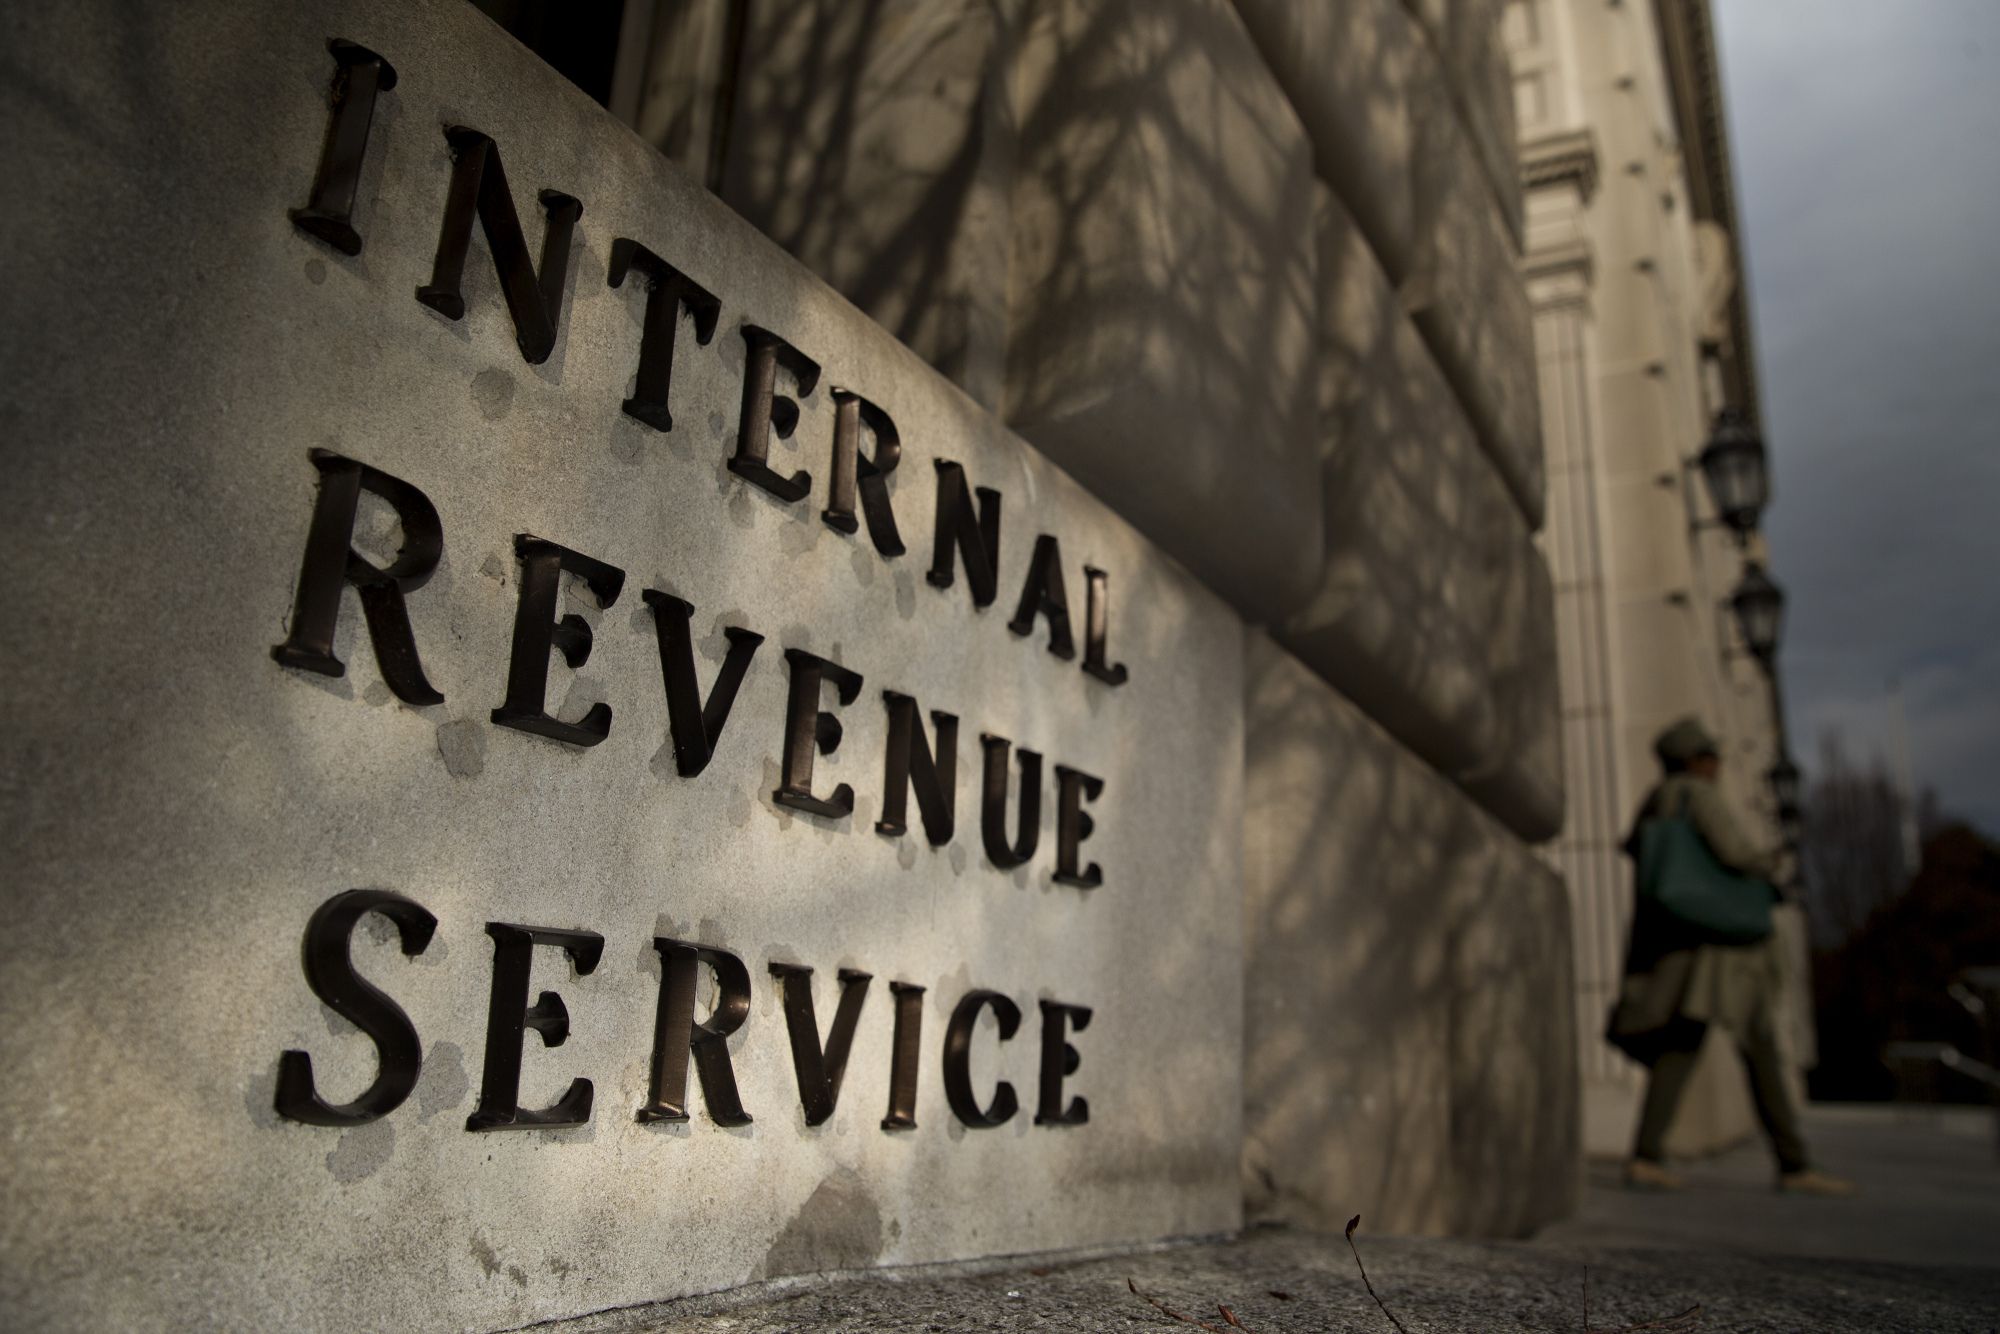 A woman walks out of the Internal Revenue Service (IRS) headquarters building in Washington, D.C. Photographer:Andrew Harrer/Bloomberg